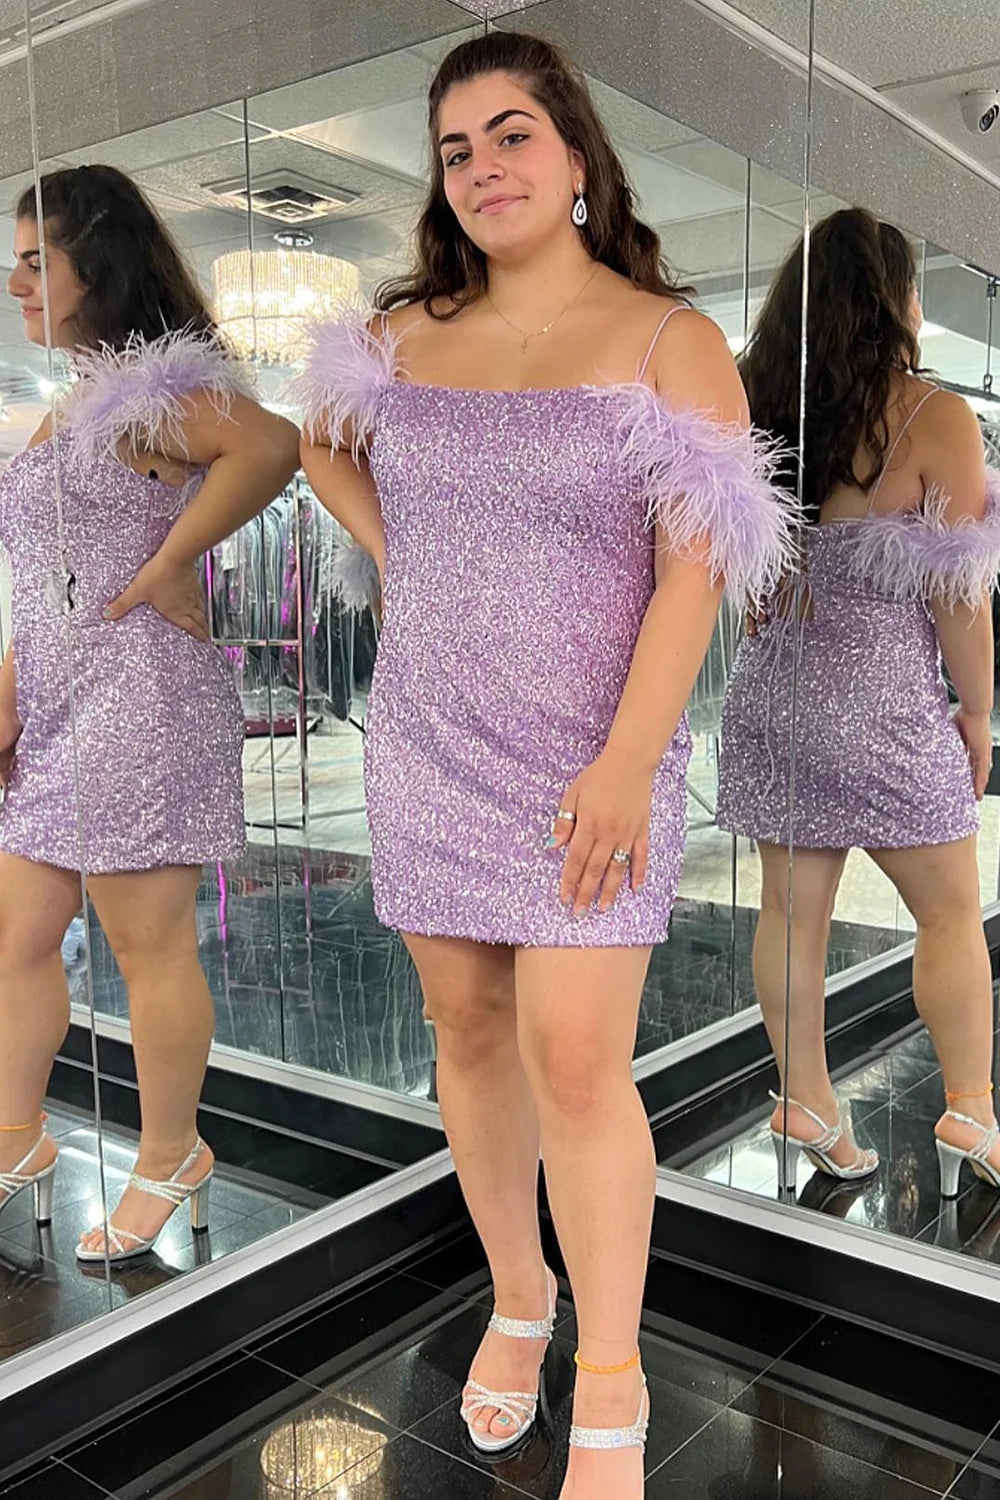 Sparkly Lilac Sequins Tight Short Homecoming Dress with Feathers VK23062402